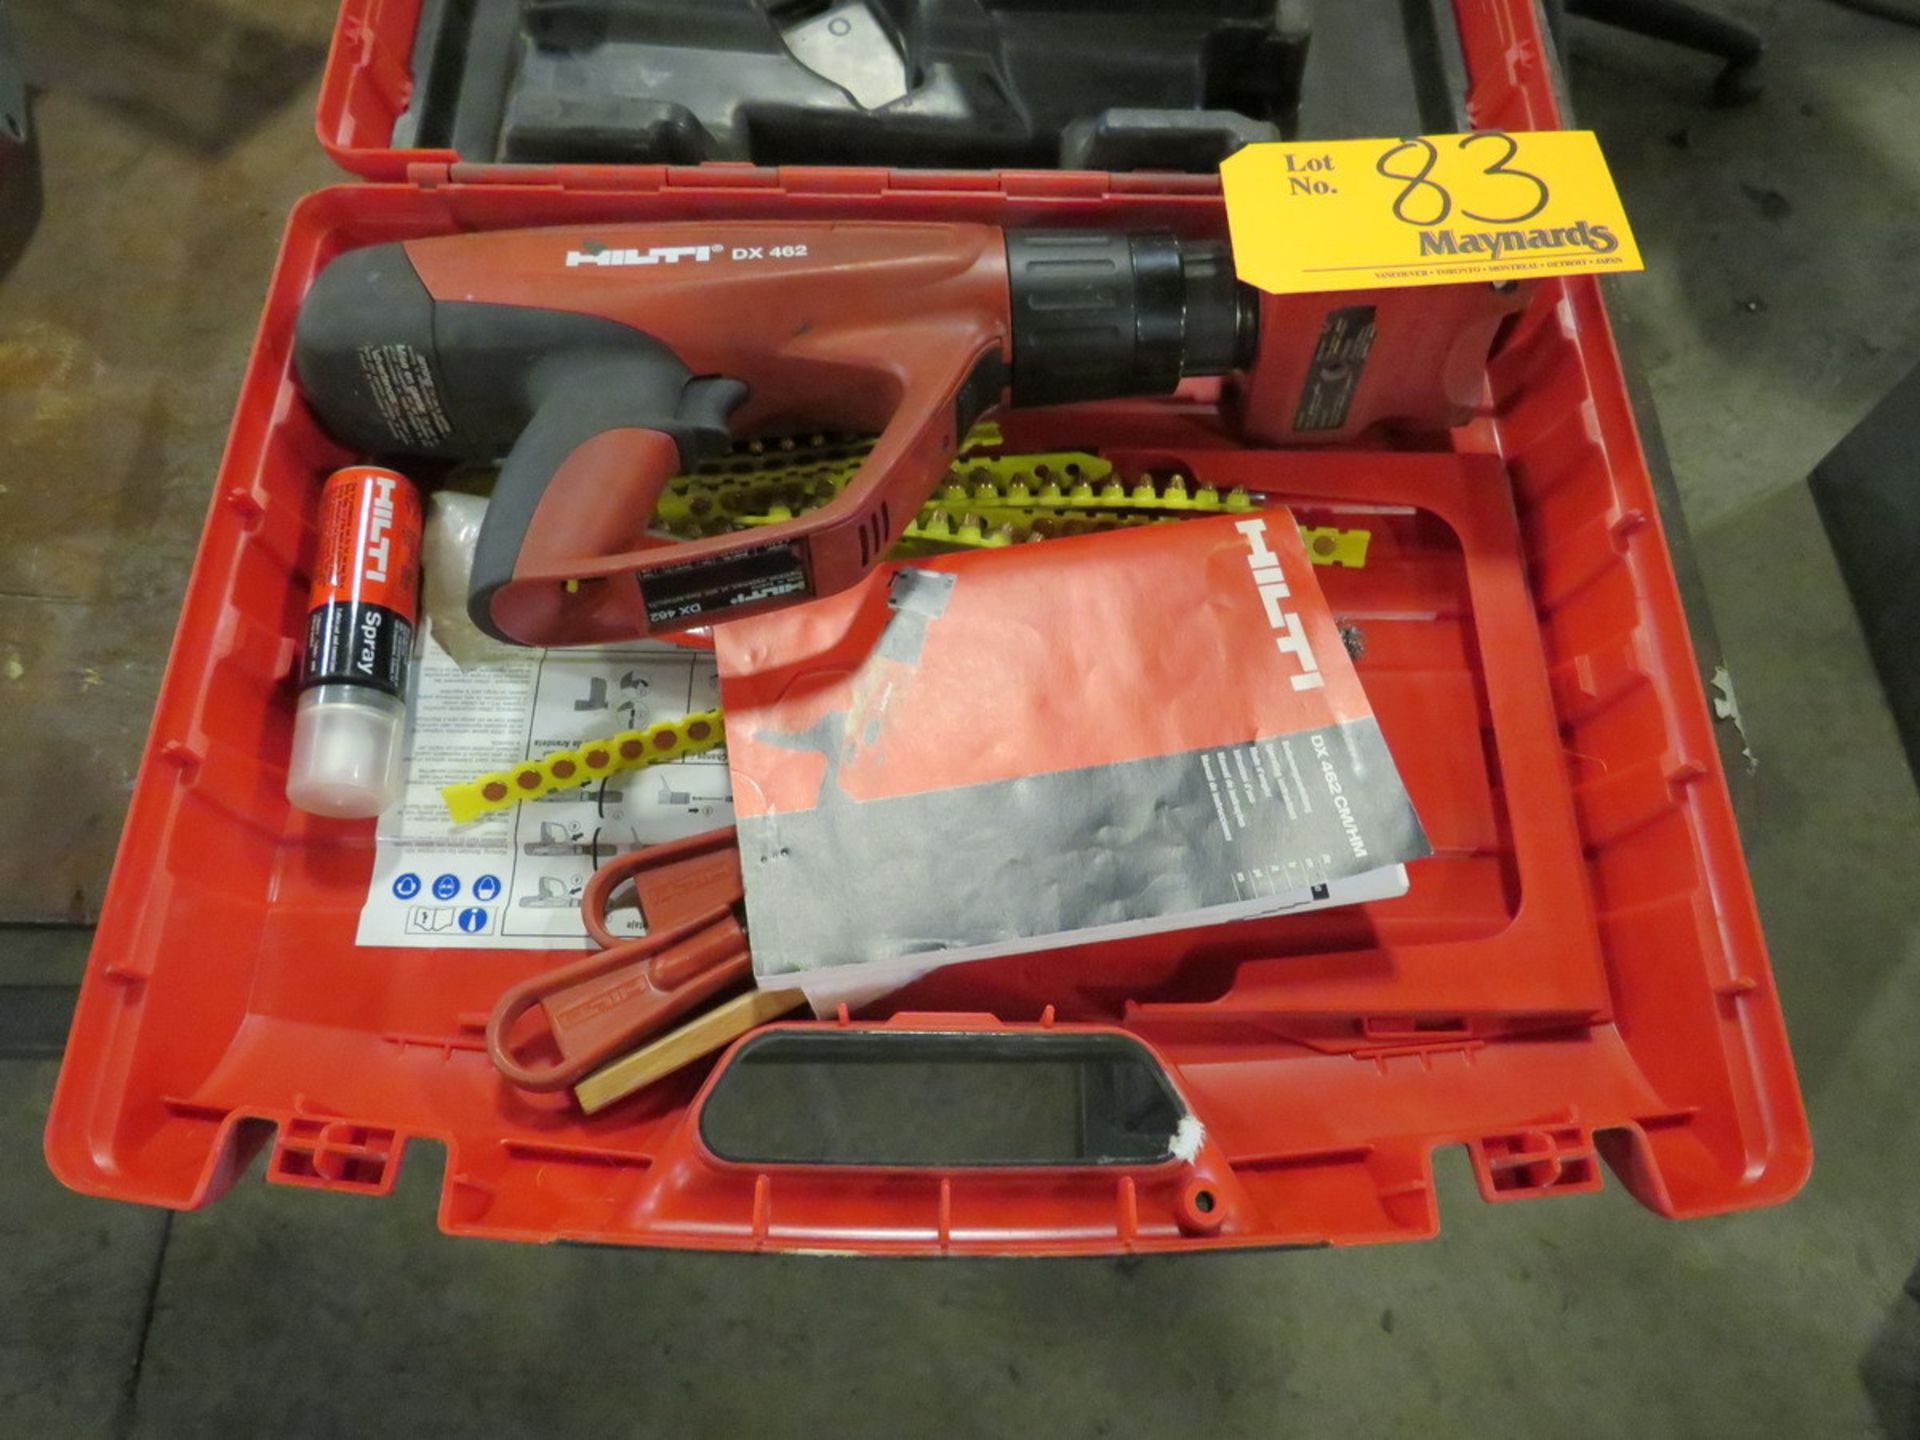 Hilti DX462 Powder Actuated Tool